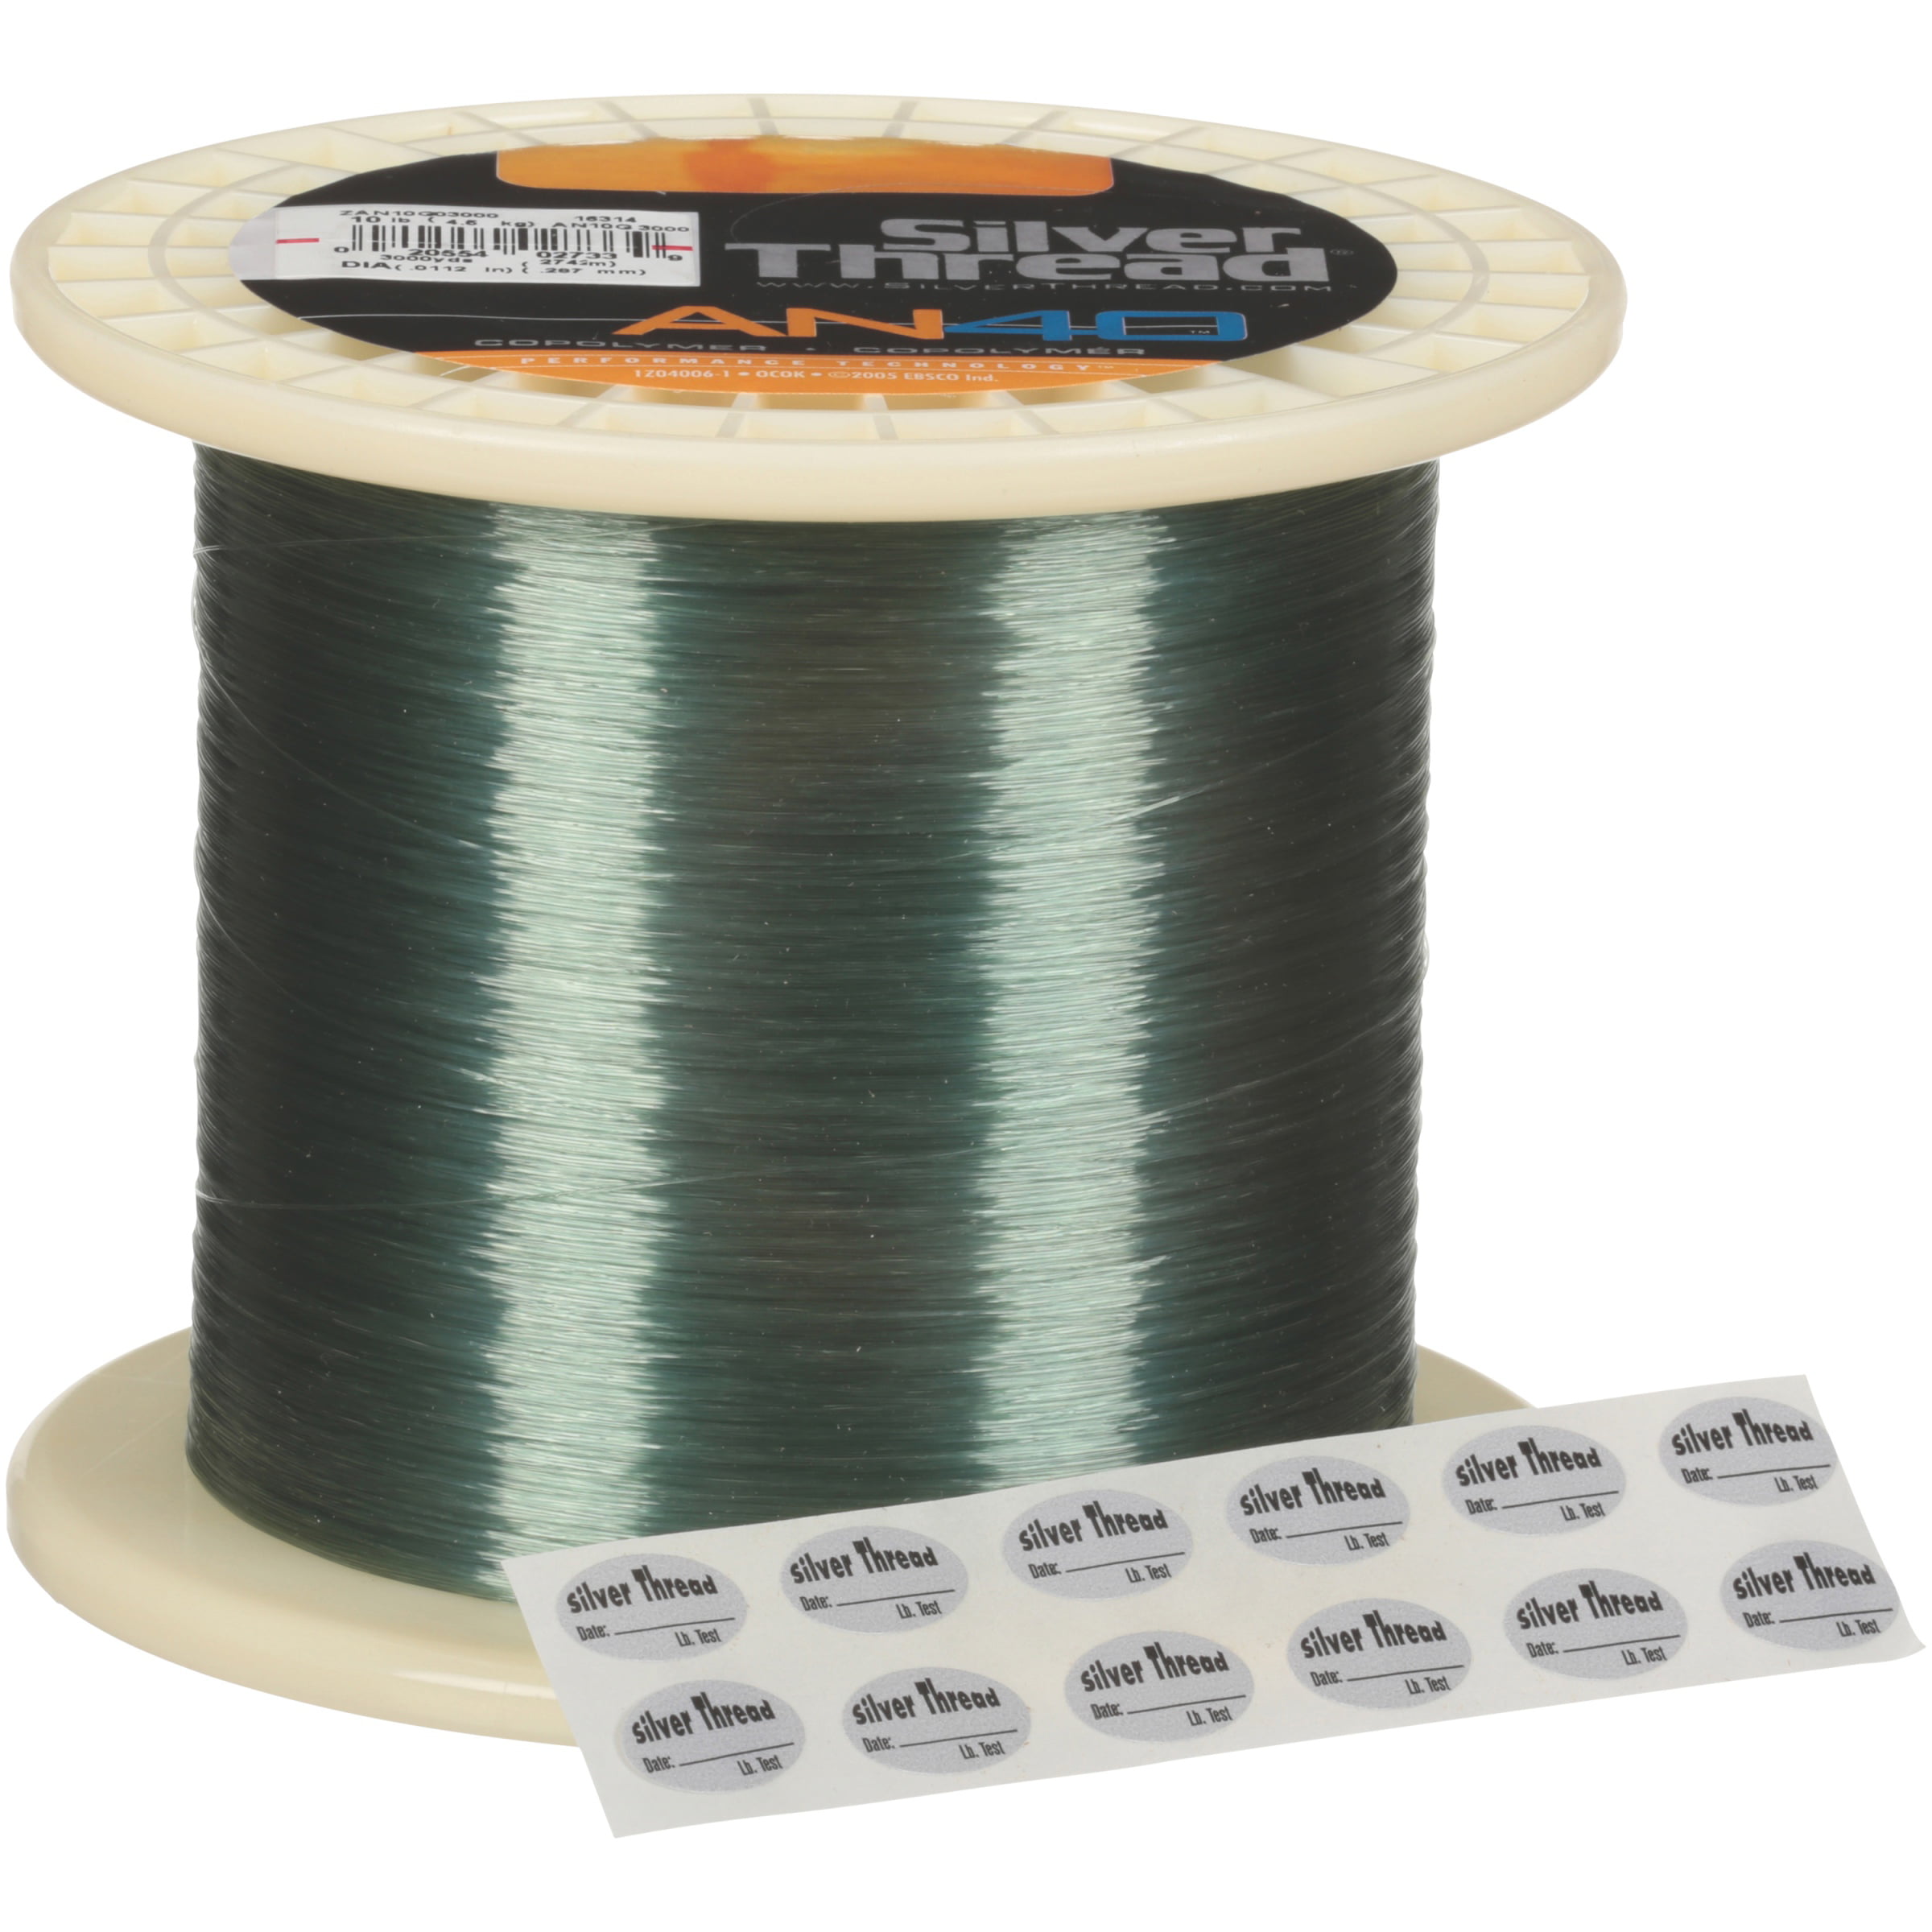 Silver Thread An40 Silver 300yd 10lb Fish Fishing Line for sale online 